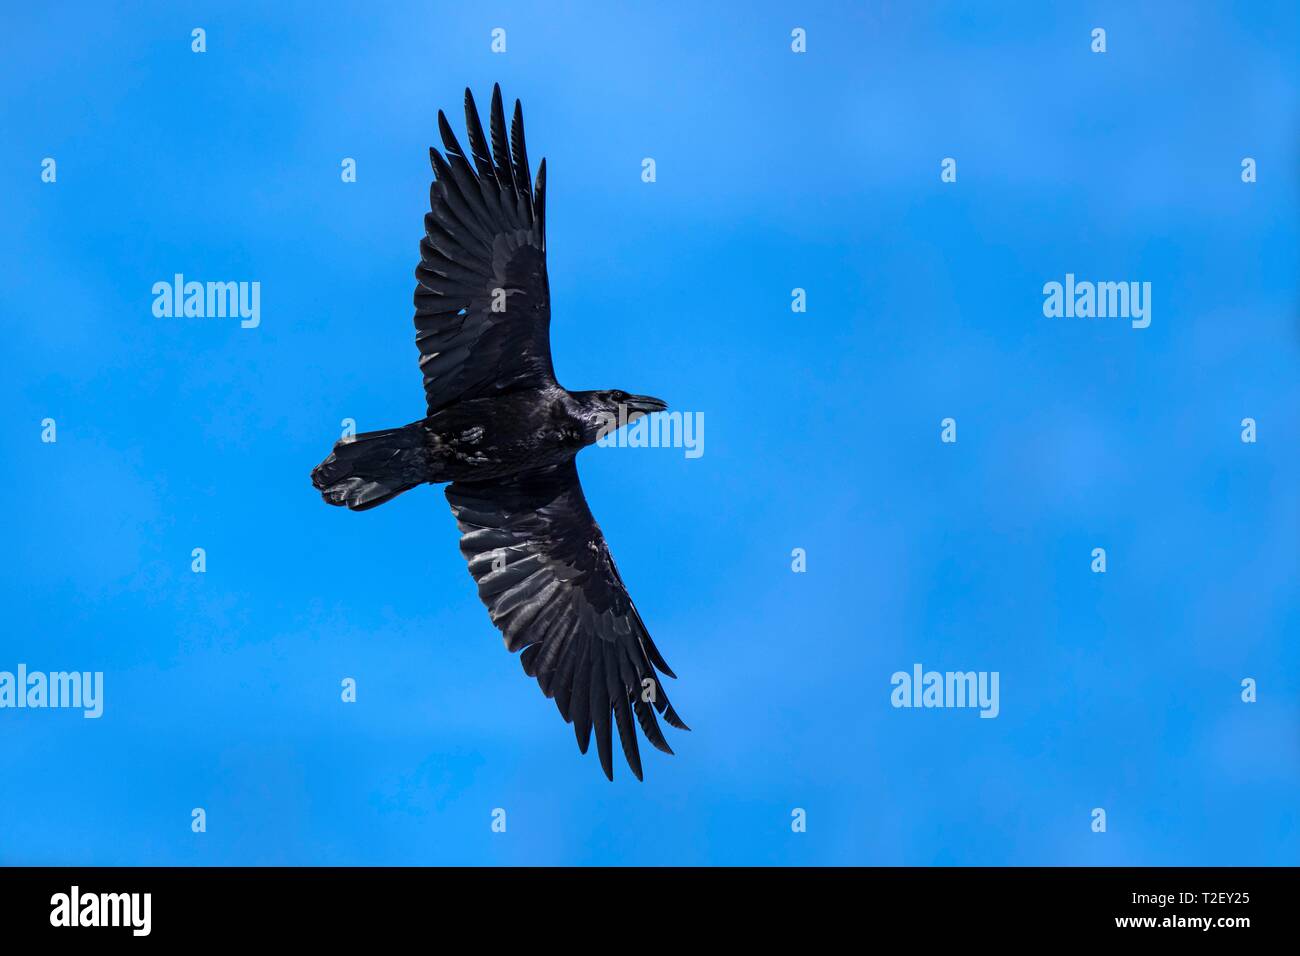 Common raven (Corvus corax), flying in front of a blue sky, Austria Stock Photo